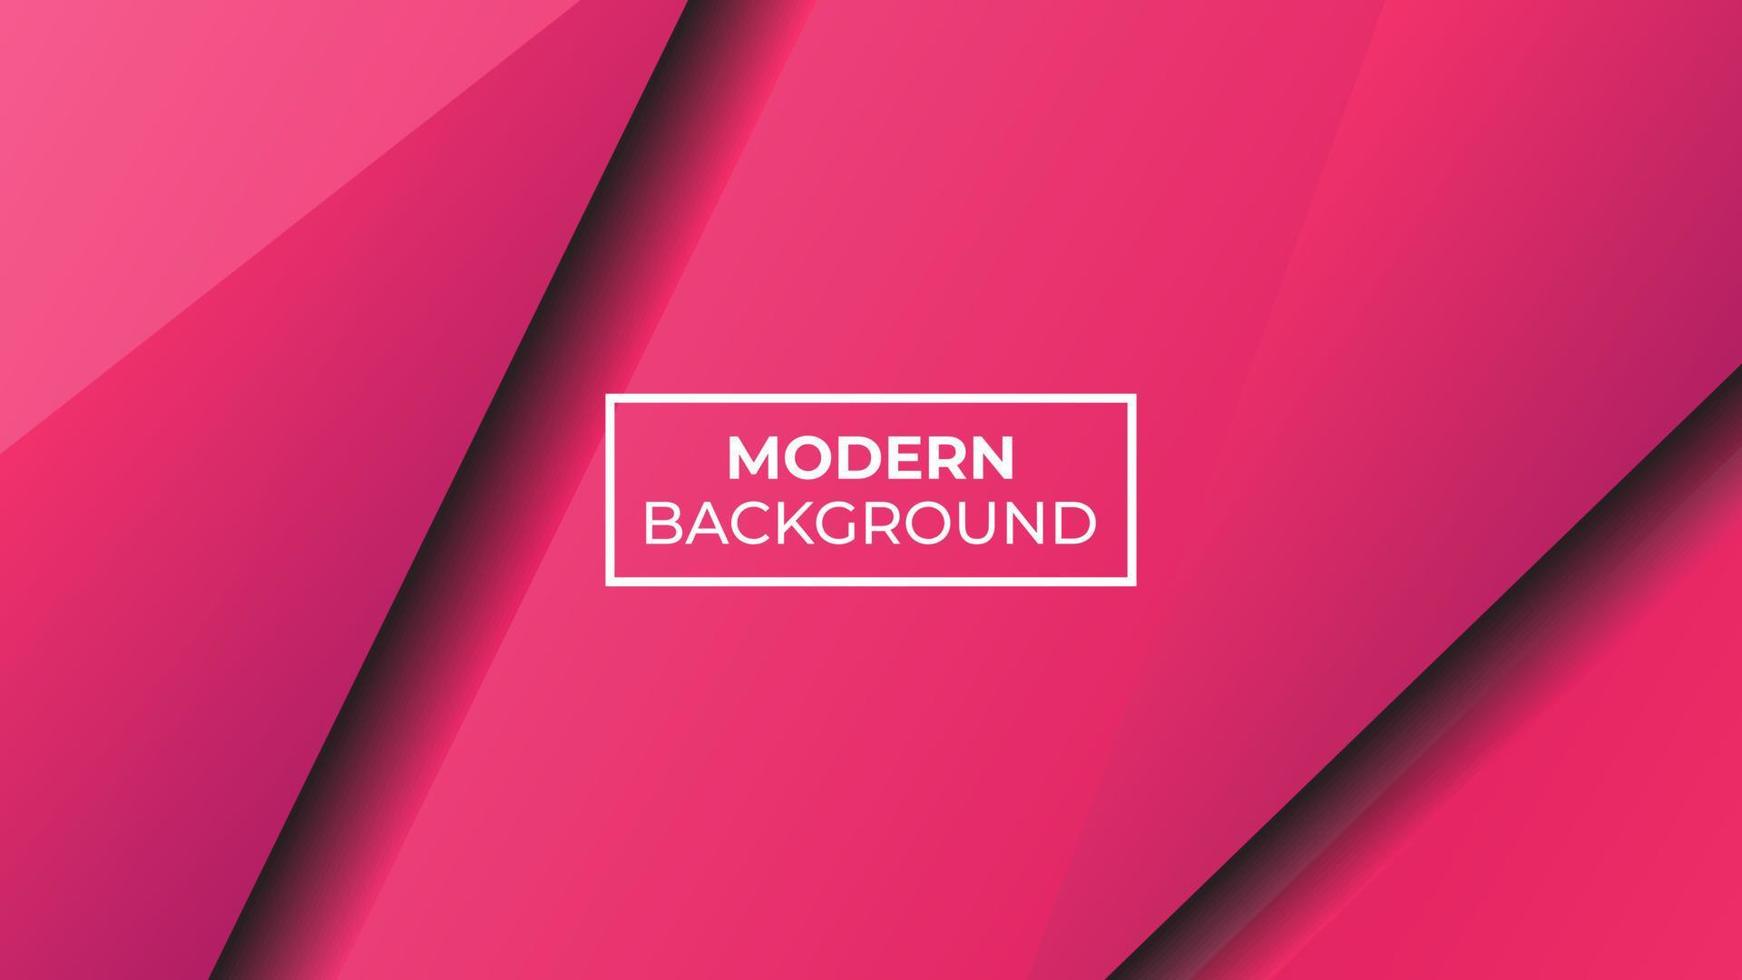 Modern background gradation of pink and dark colors with two triangles, easy to edit vector